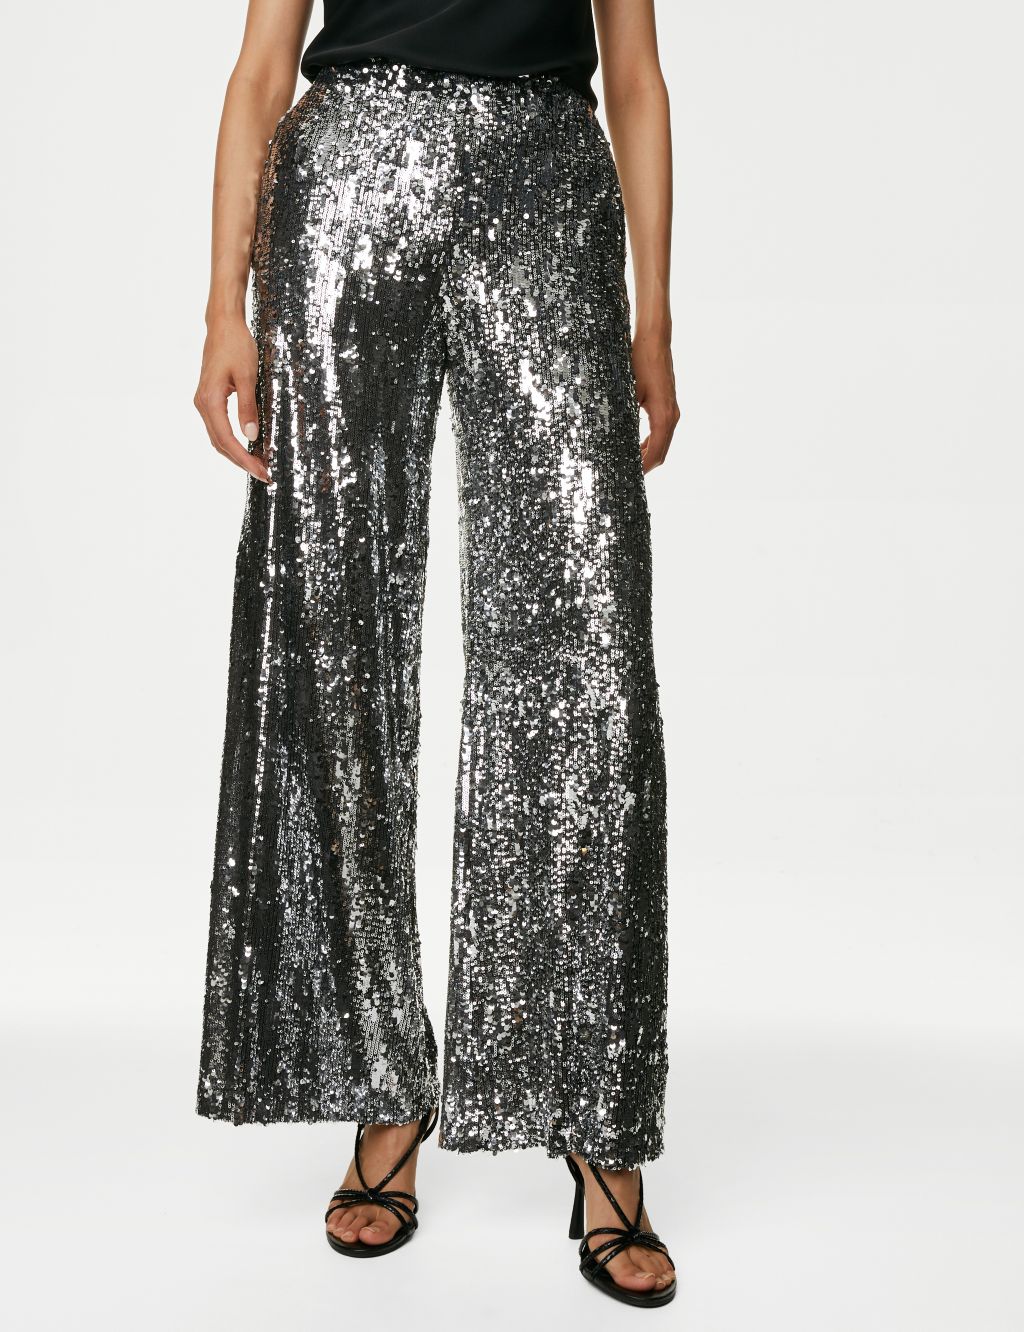 Sequin Elasticated Waist Wide Leg Trousers image 4